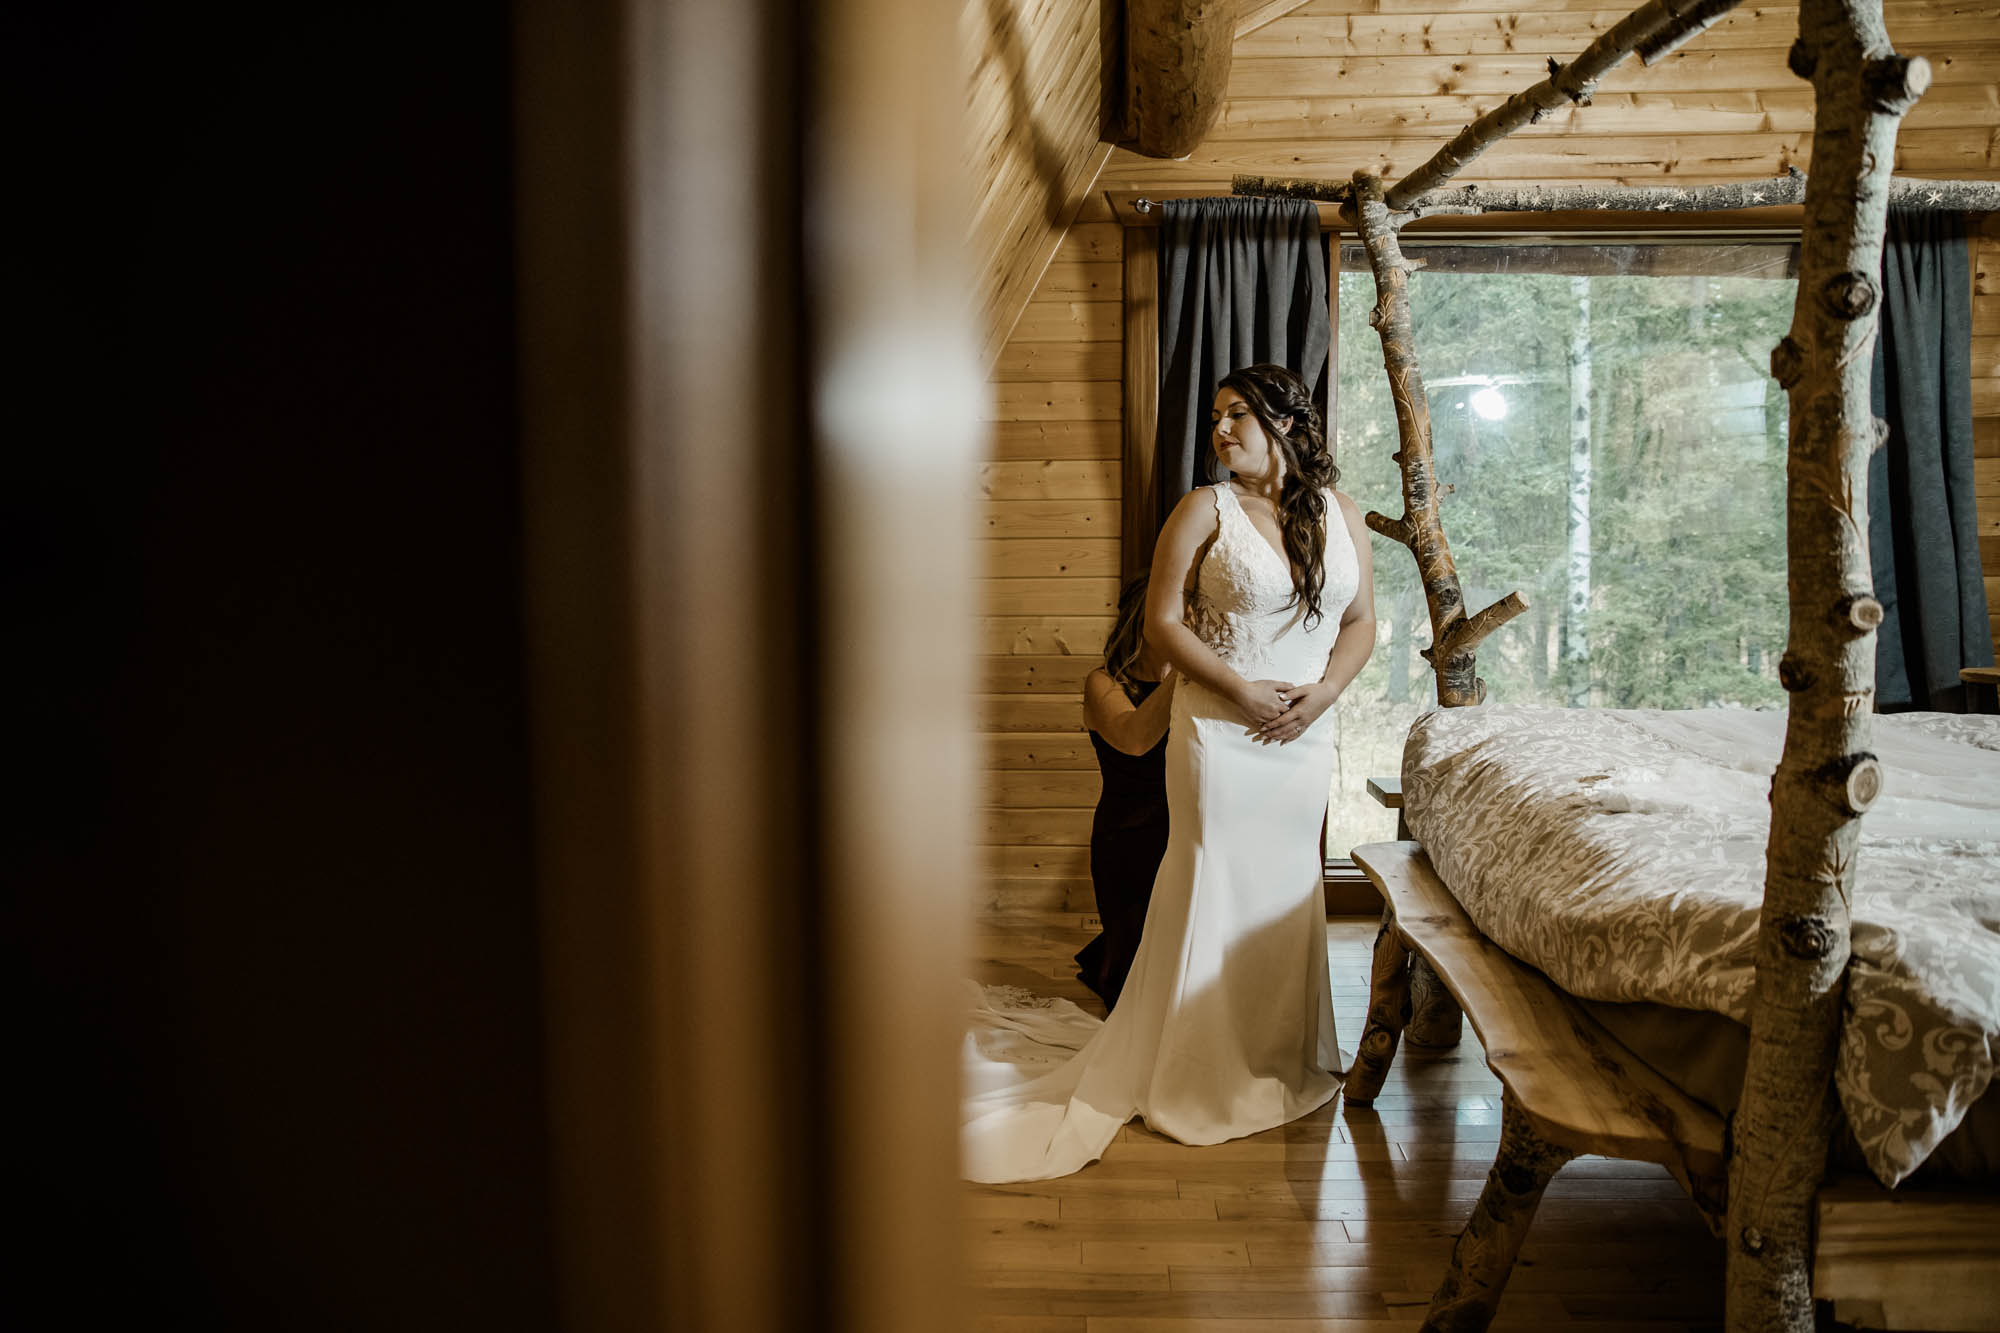 Folk Tree Lodge wedding, Calgary, Banff and Canmore wedding photographer, micro wedding, intimate ceremony on a beautiful rustic lodge property outside of Bragg Creek by Kananaskis Country